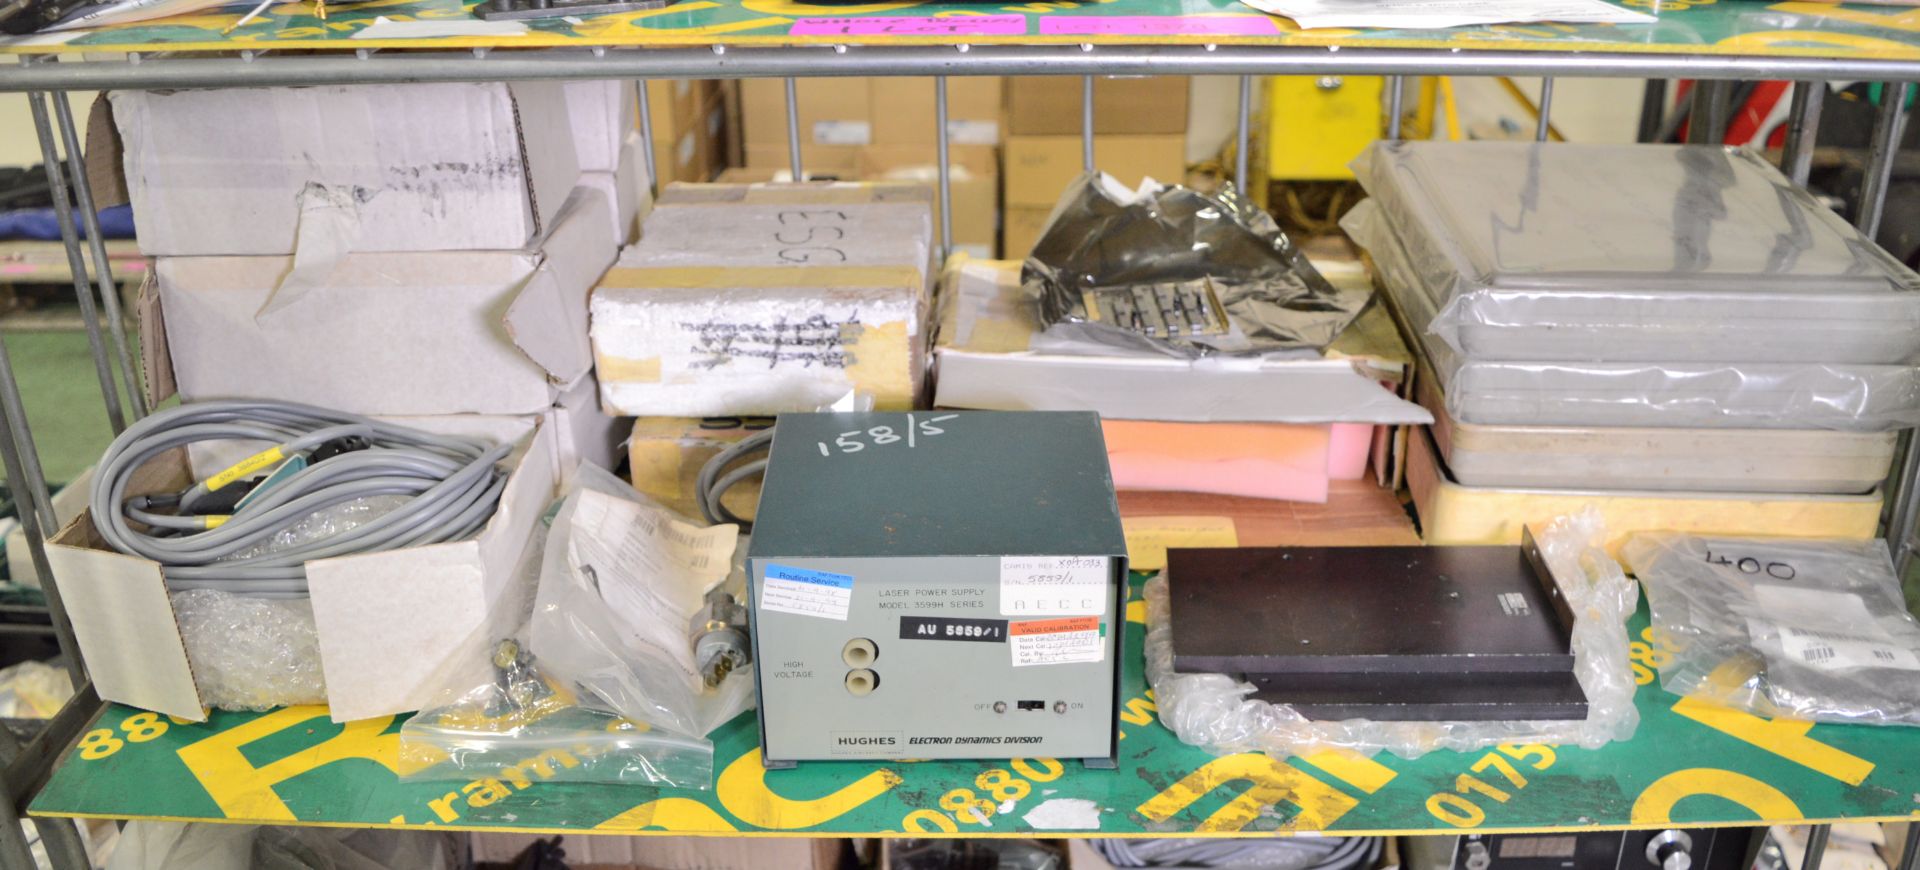 Whole Trolley of MoD Test Equipment, Spare Parts, Surplus. - Image 3 of 5